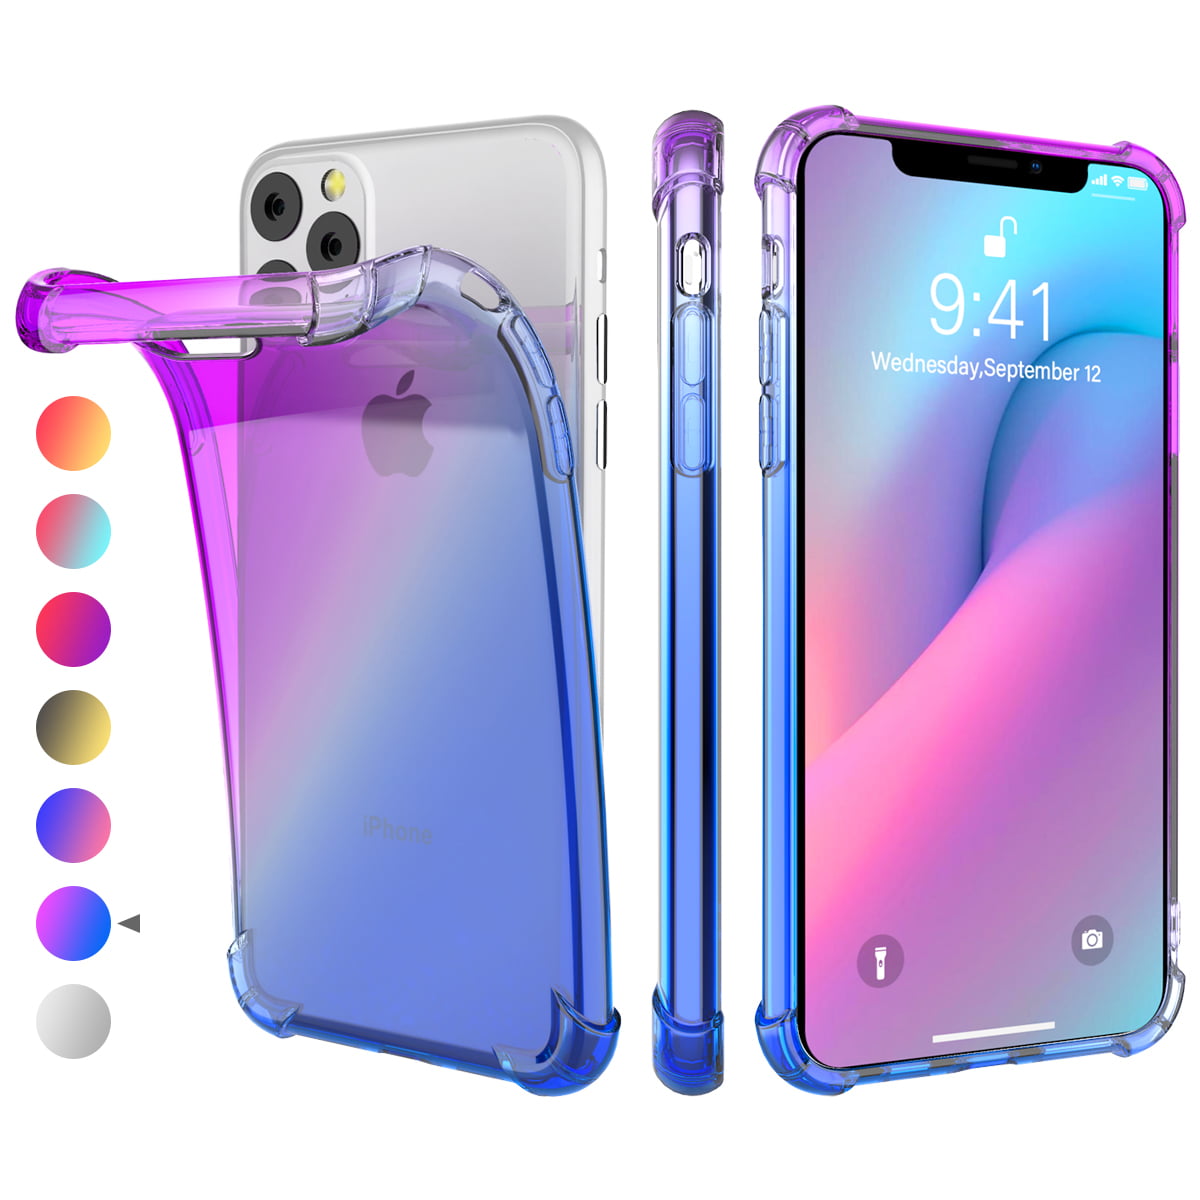 Designed For Iphone 11 Xi Pro 5 8 Inch Case Hd Clear Ultra Thin Slim Fit Soft Tpu Protective Case Shock Absorption Anti Scratch Cover Compatible For Iphone 11 Cases Xi Pro 5 8 Inch Purple Blue Walmart Com